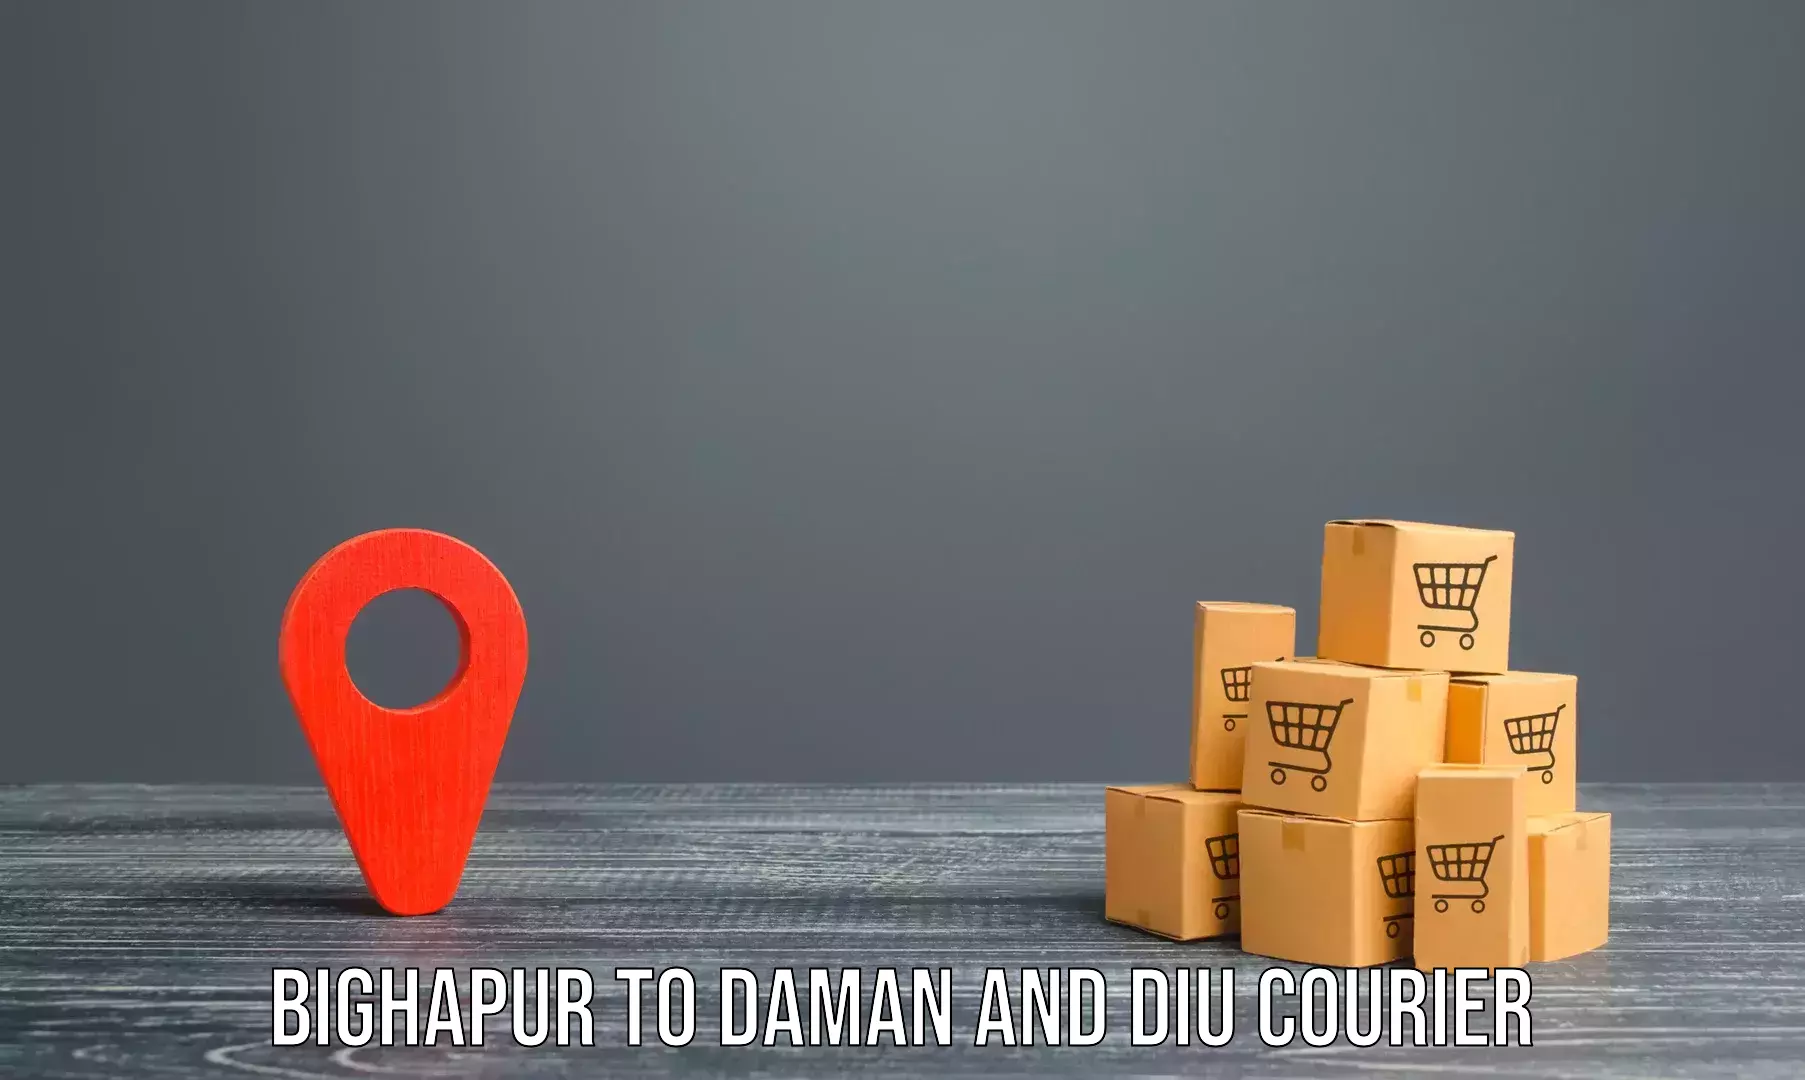 Furniture moving specialists Bighapur to Daman and Diu